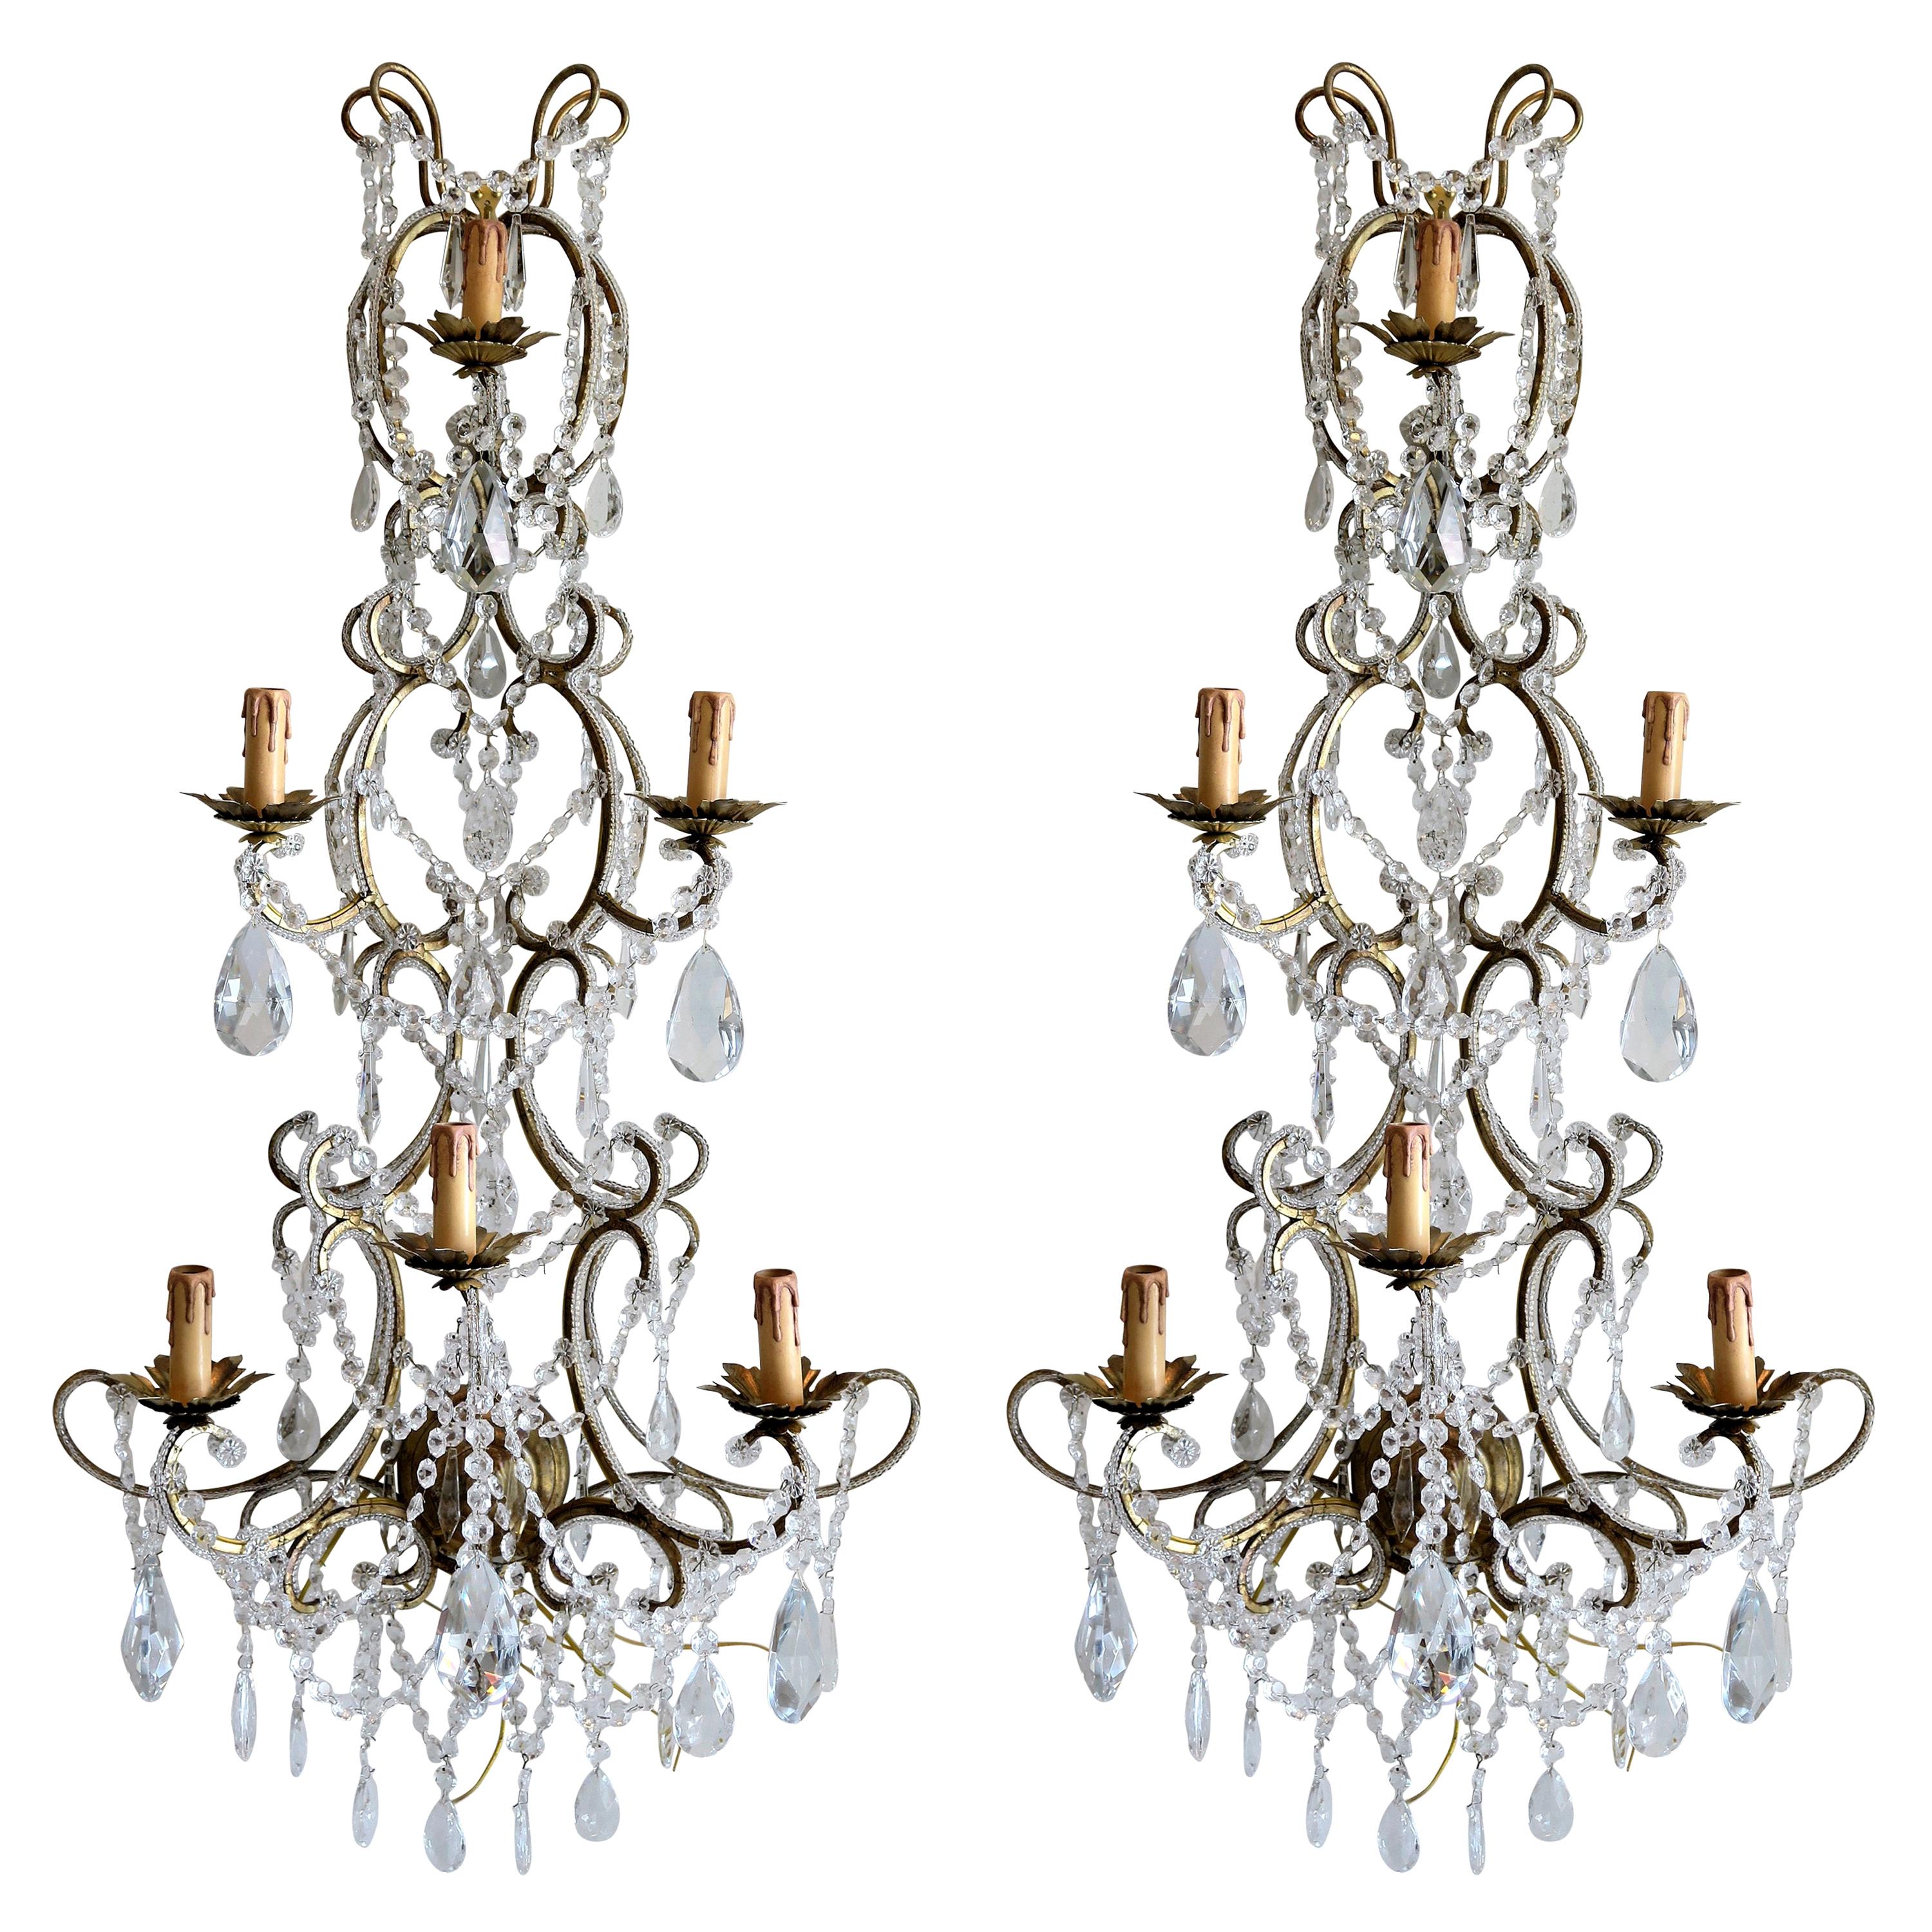 Pair of Italian Beaded Crystal Sconces in Antique Gold Frame, Italy